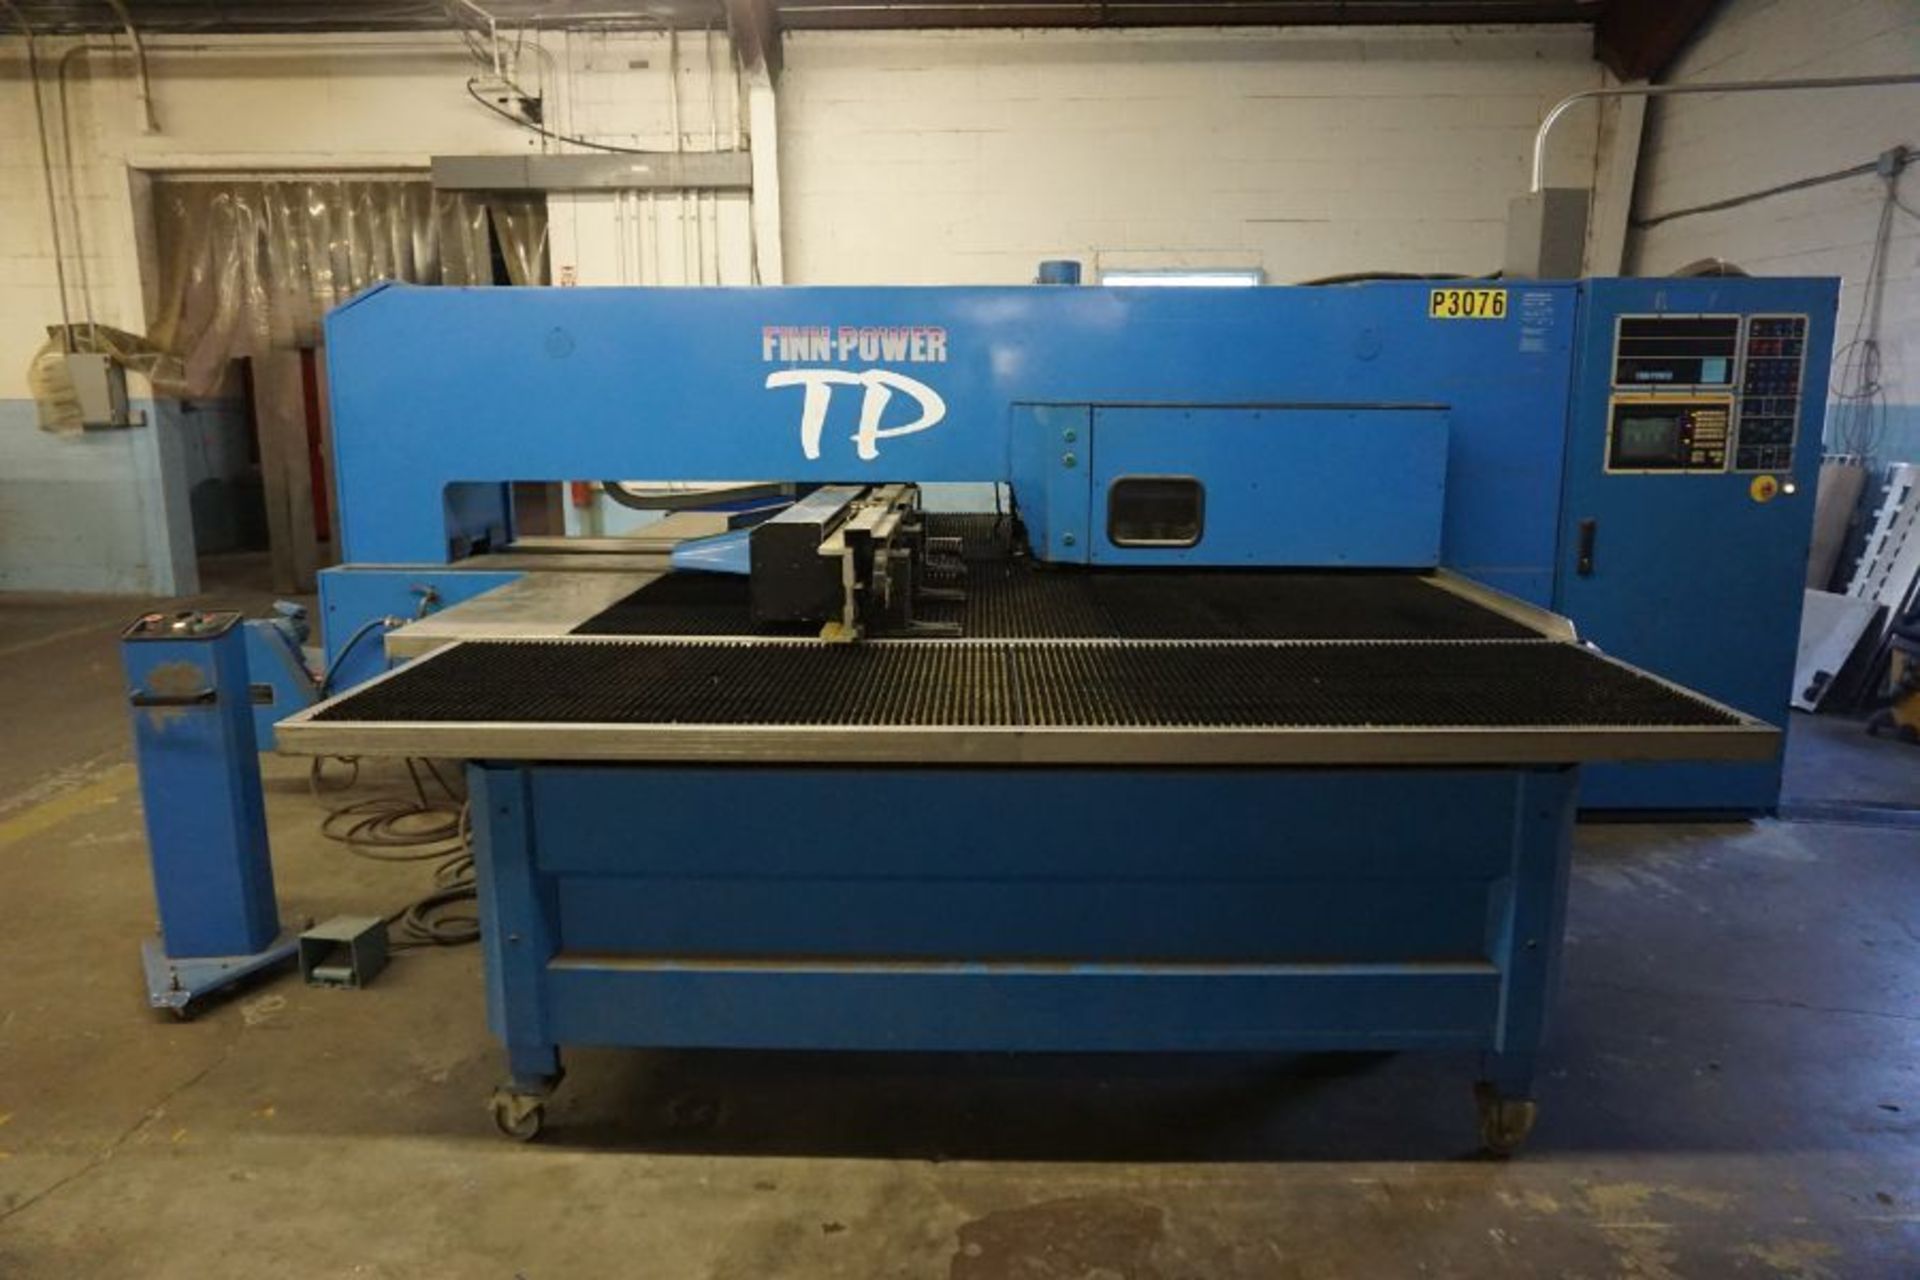 1996 FinnPower TP 2520 CNC Turret Punch, 33 Ton, 50"x100" Sheet Size *Auctioned from Edgerton, KS*